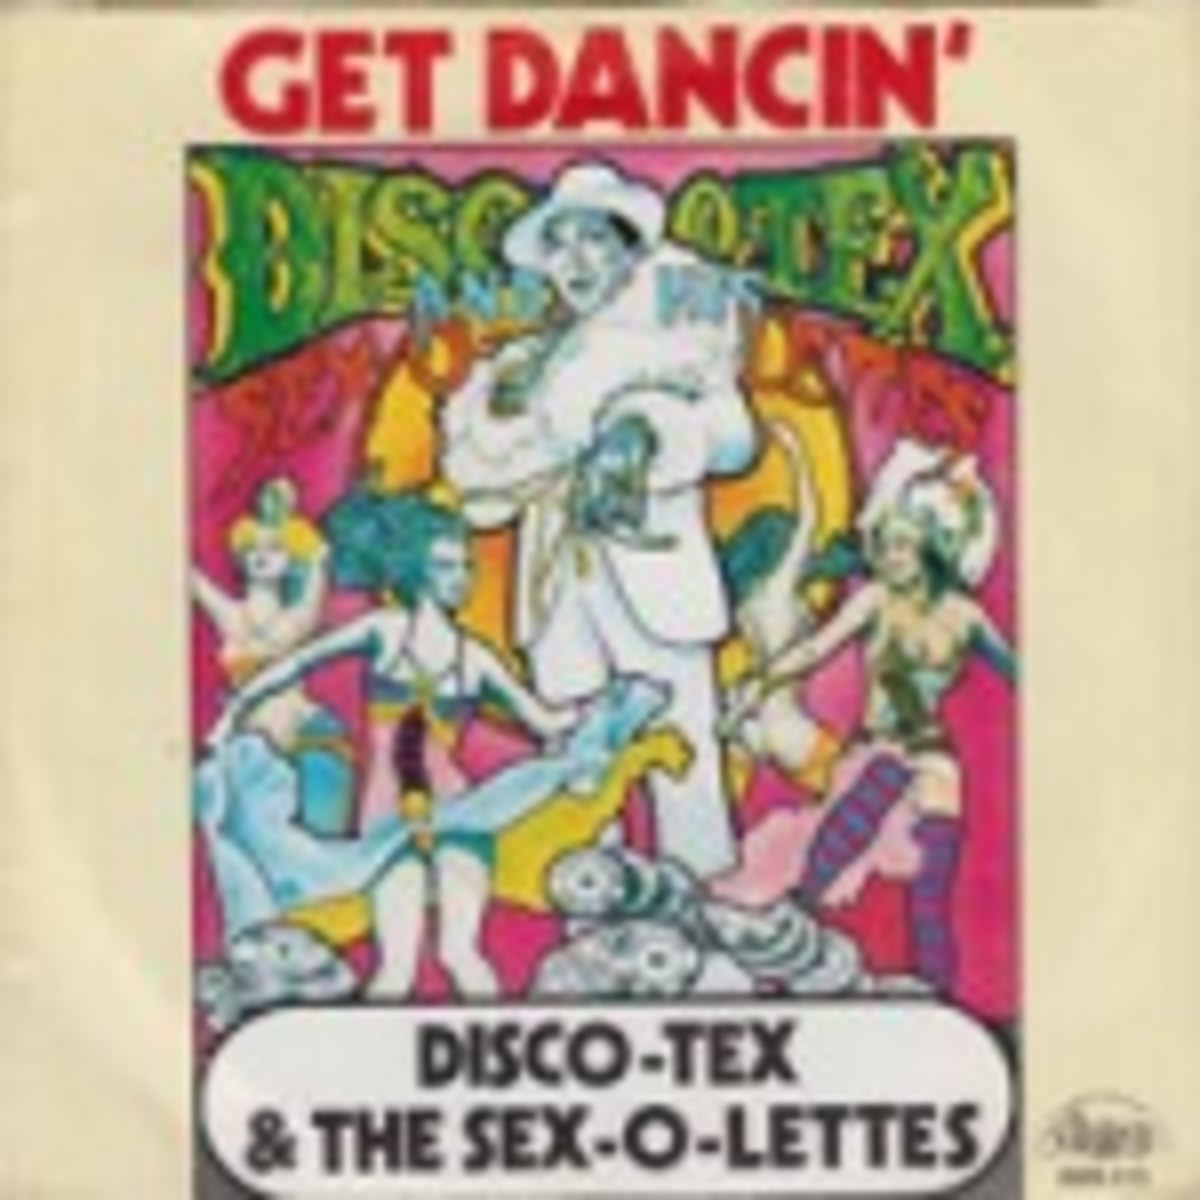 Disco Tex and the Sex o Lettes Get Dancin'